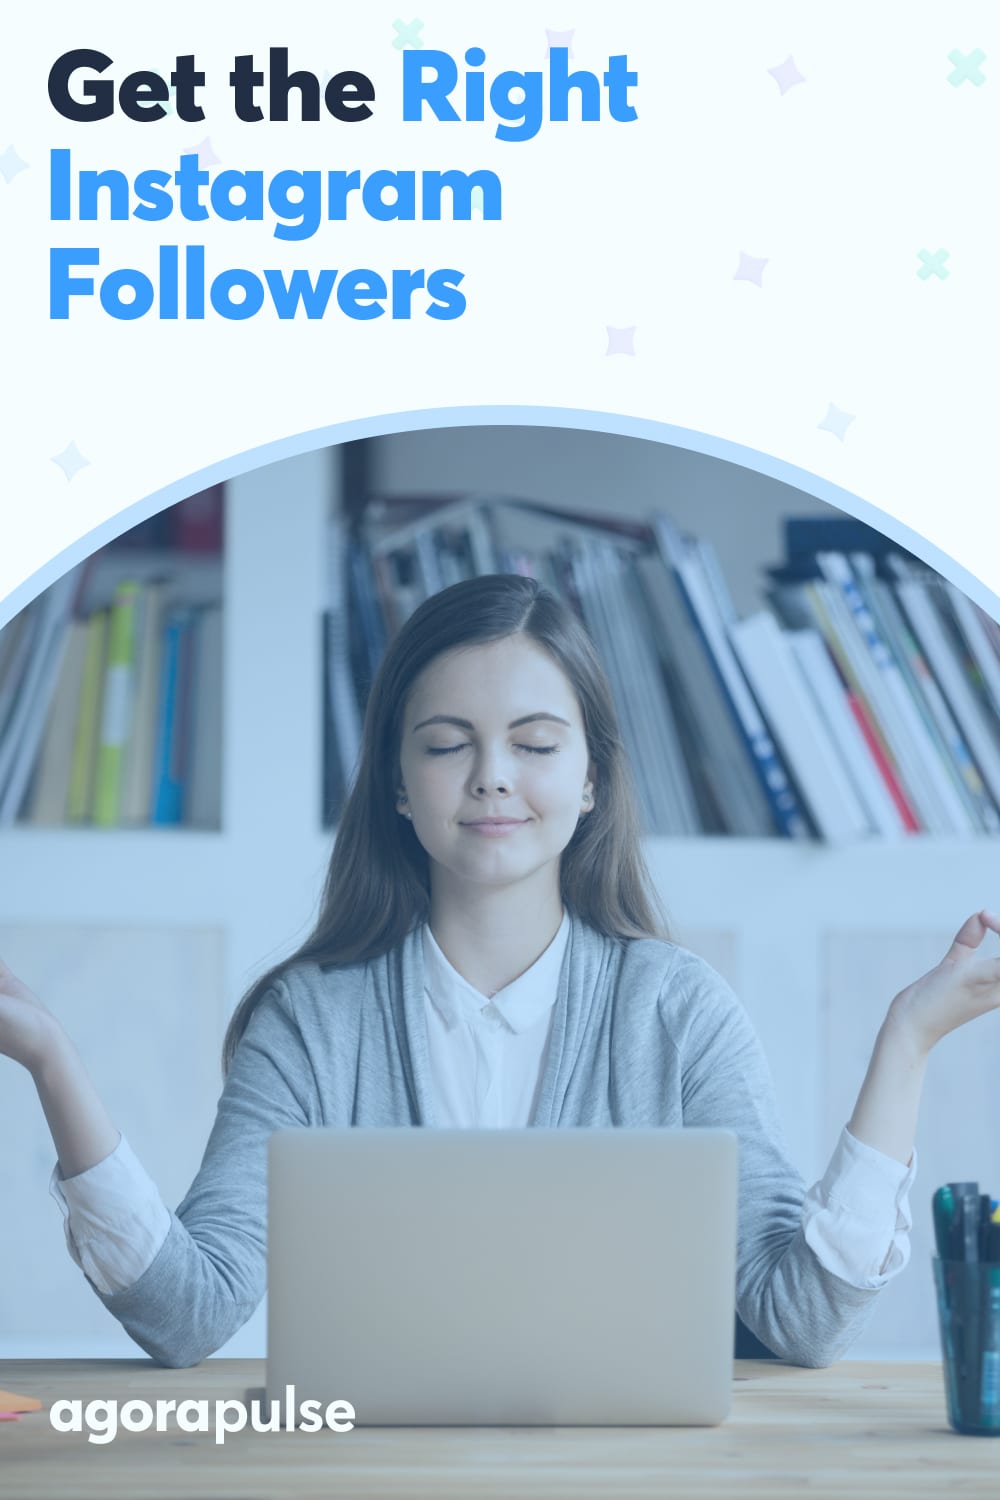 How to Get More Instagram Followers Who Are More Relevant for Your Business